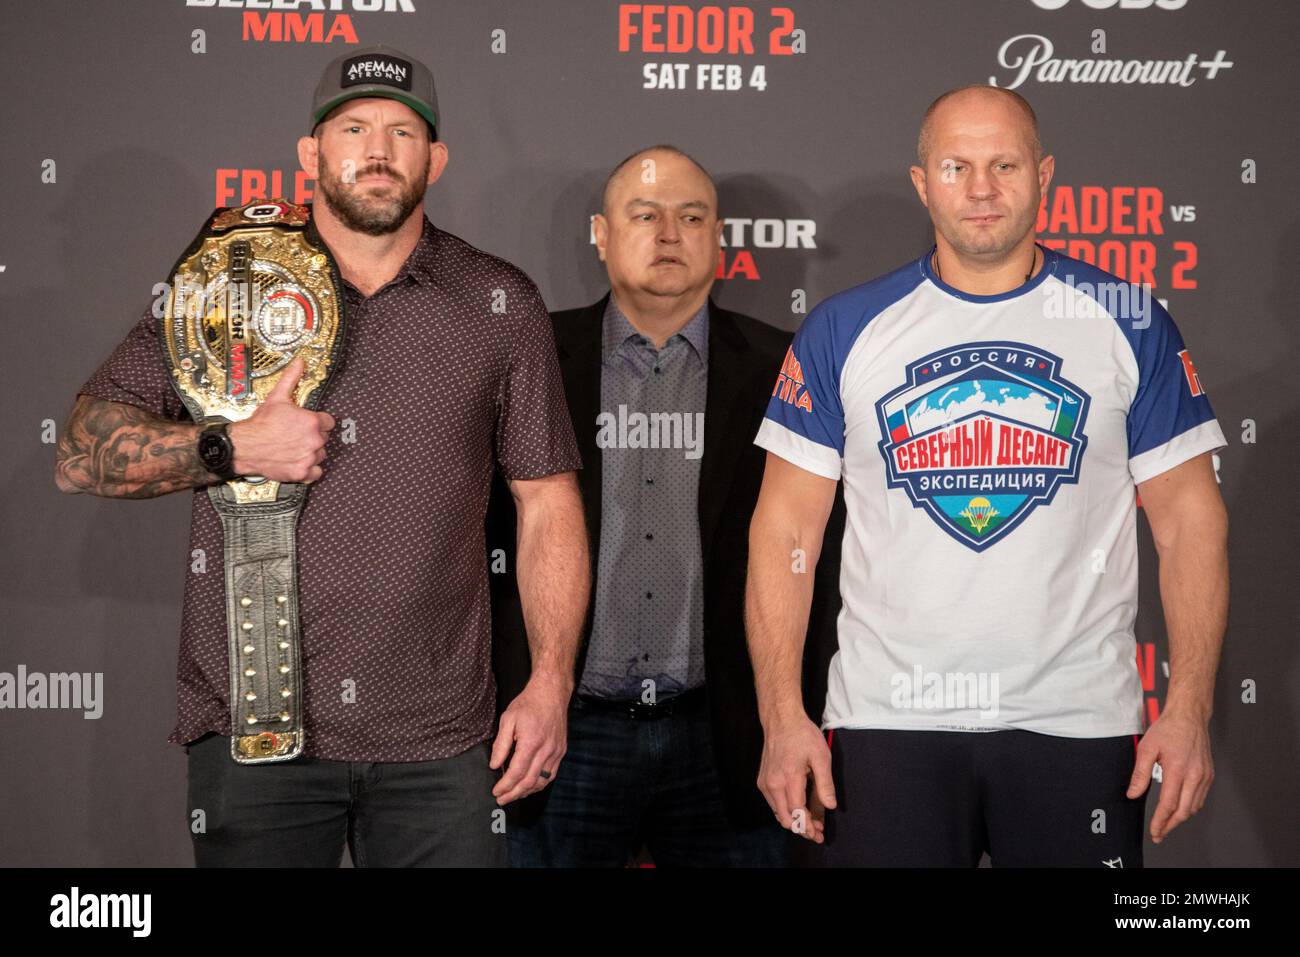 Los Angeles, California - February 1st: Ryan Bader and Fedor Emelianenko, Face Off ahead of their Bellator Middleweight Championship fight at Bellator 290 Bader vs Fedor 2 at The Forum on February 4th, 2023 in Los Angeles, California, United States. (Photo by Matt Davies) Stock Photo